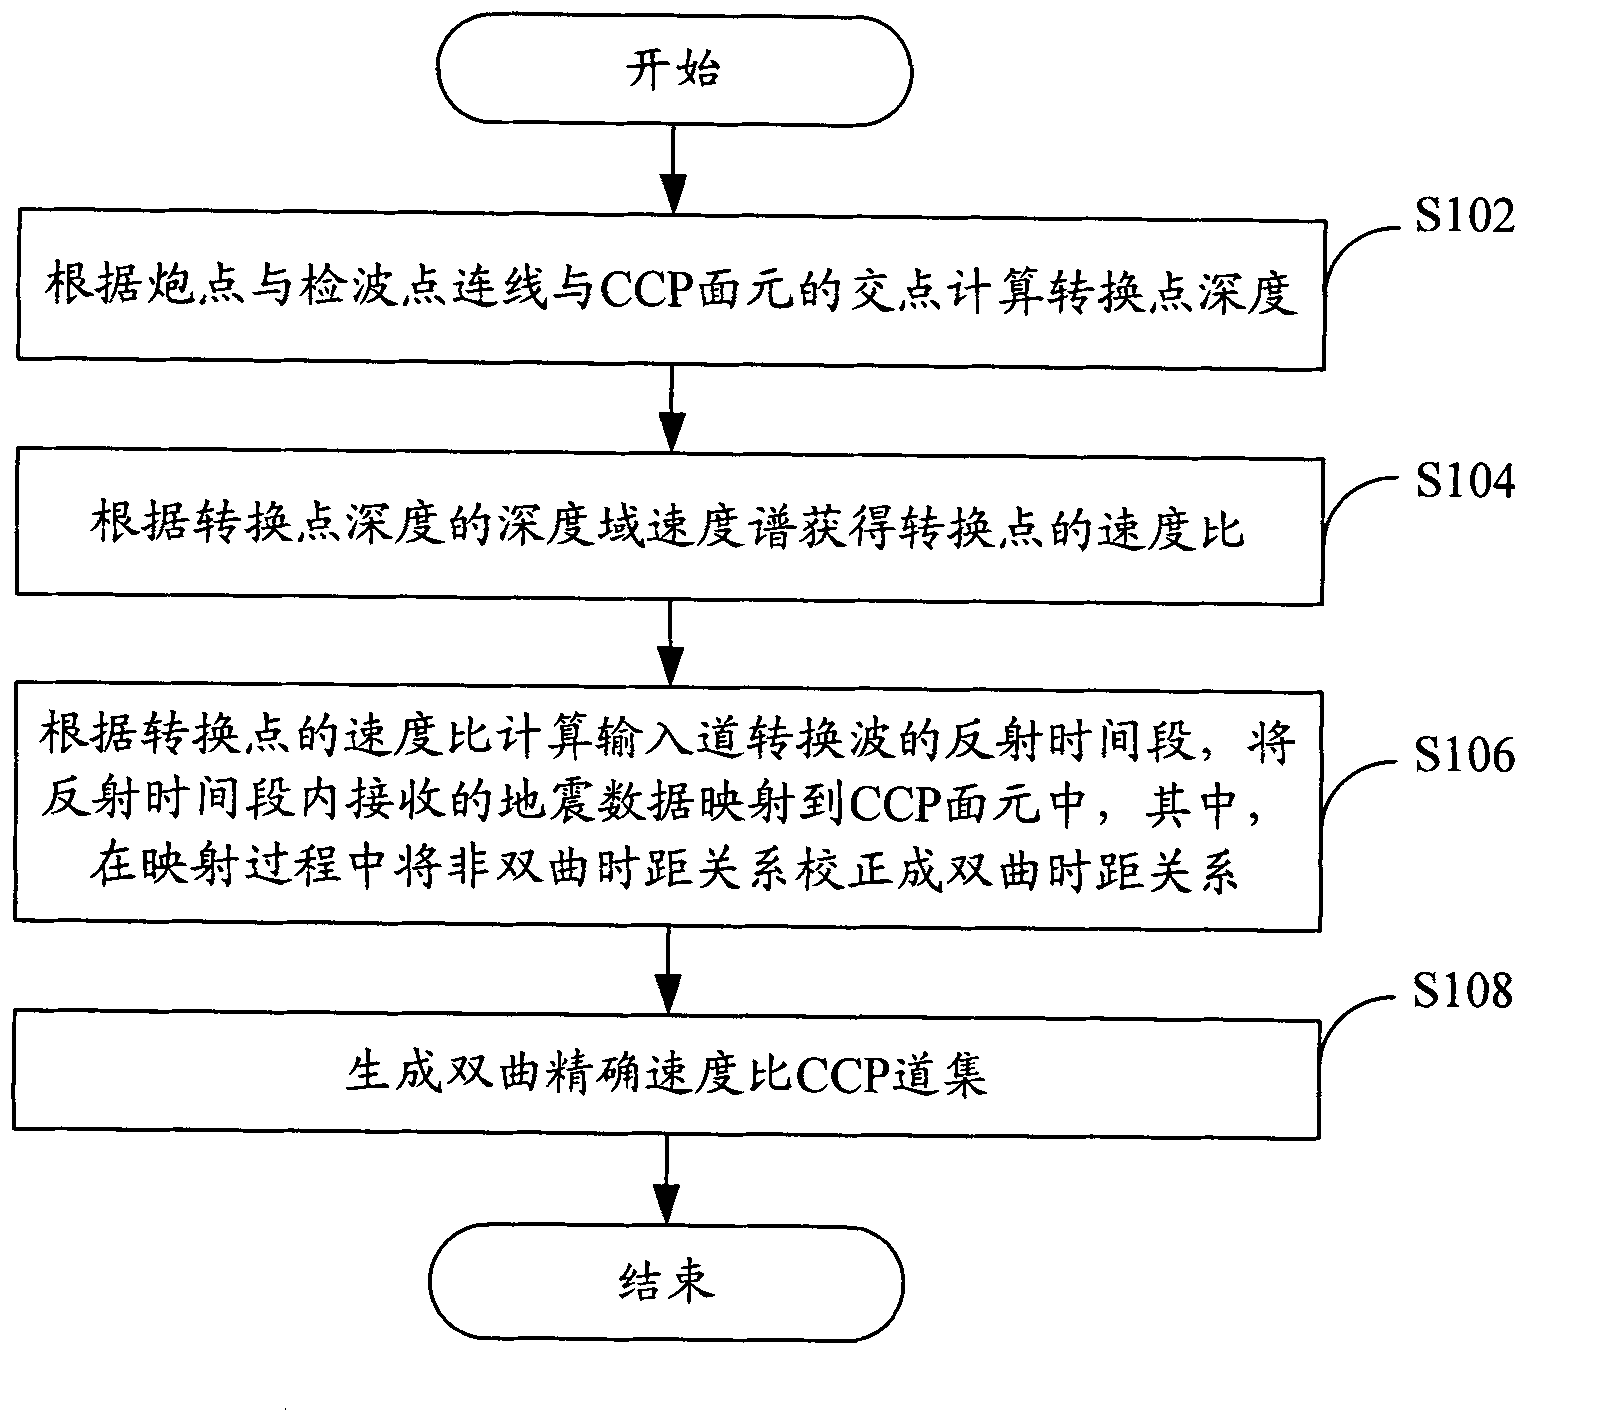 Common converted point (CCP) gathering method